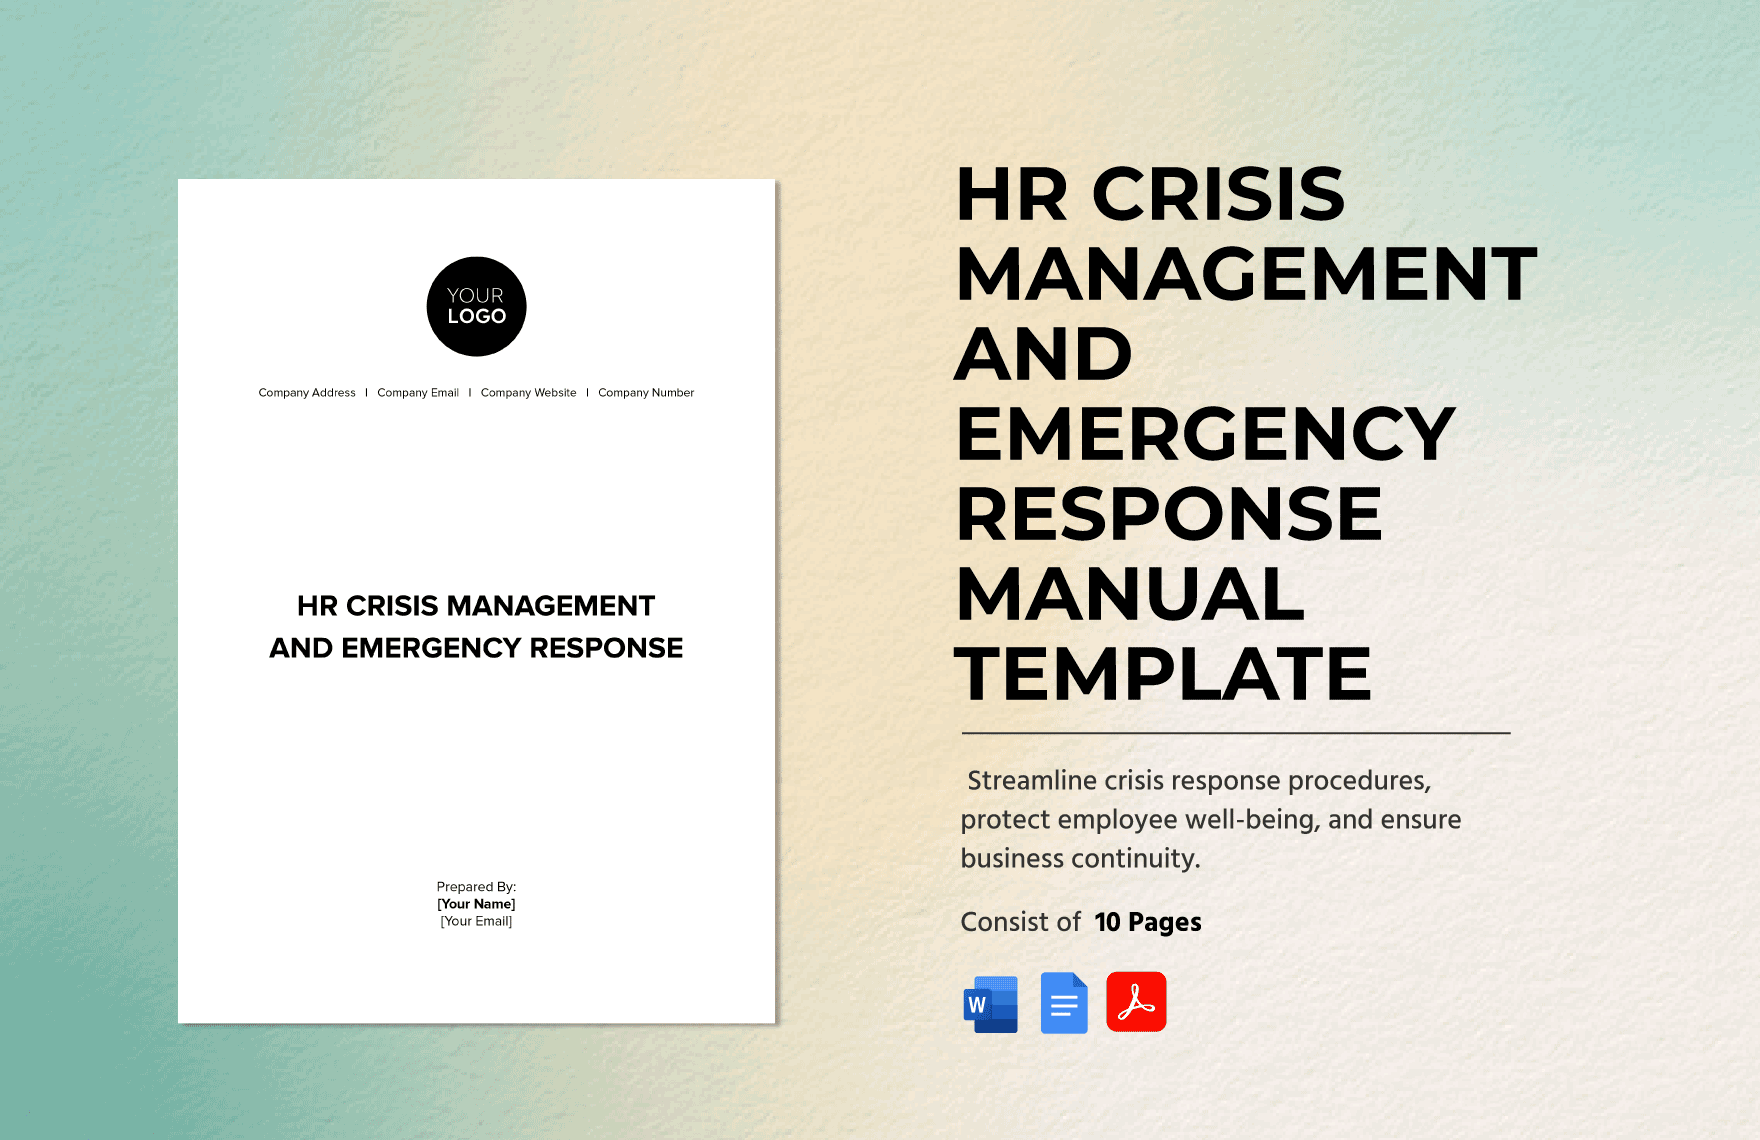 HR Crisis Management and Emergency Response Manual Template